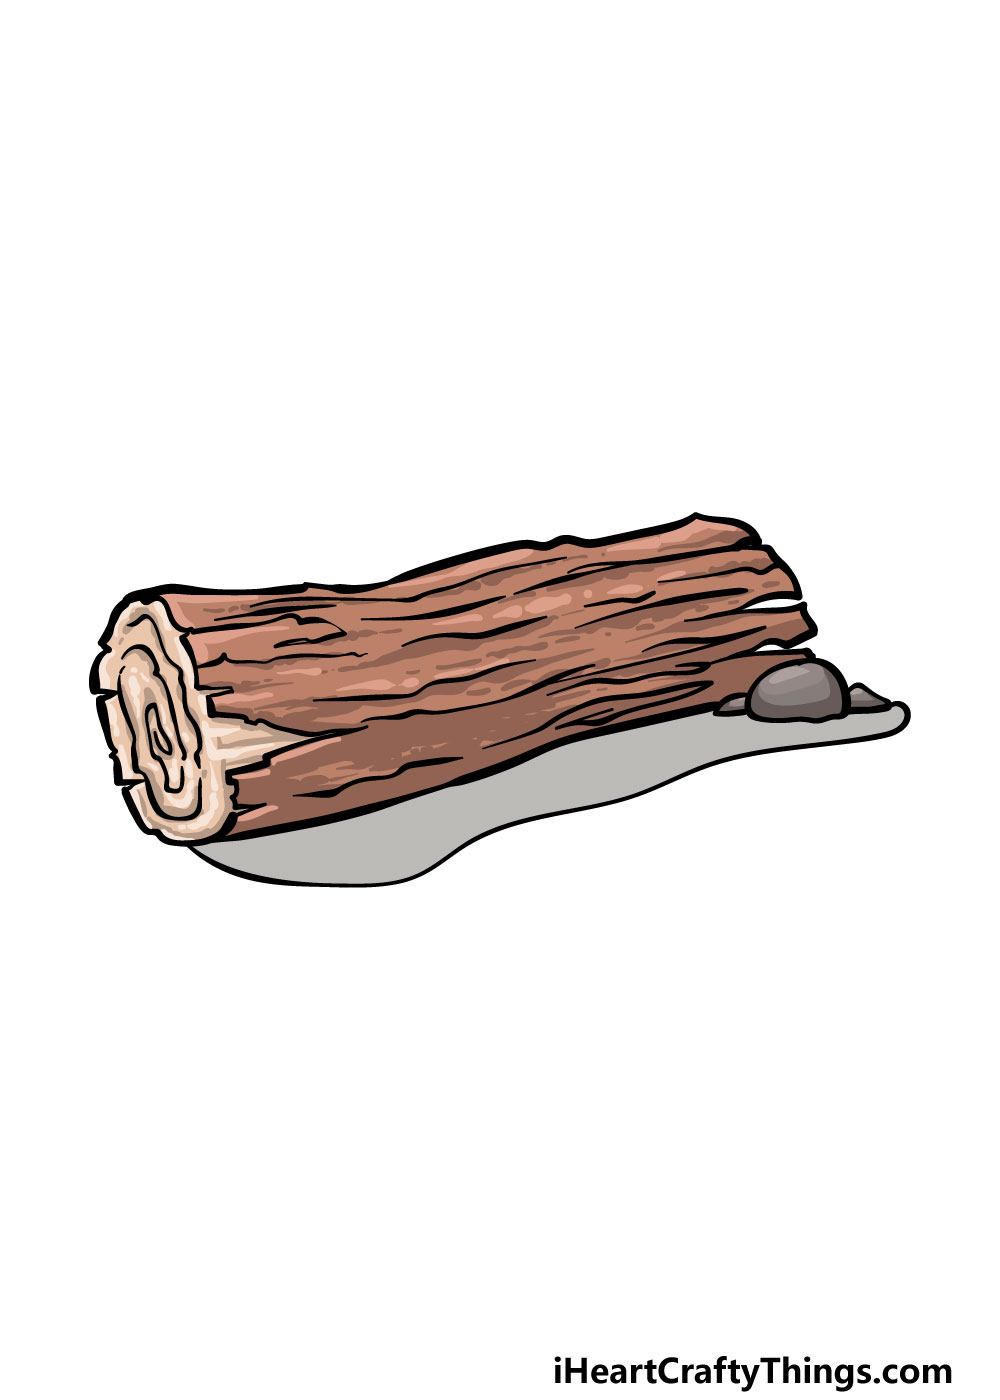 how to draw a log step 6